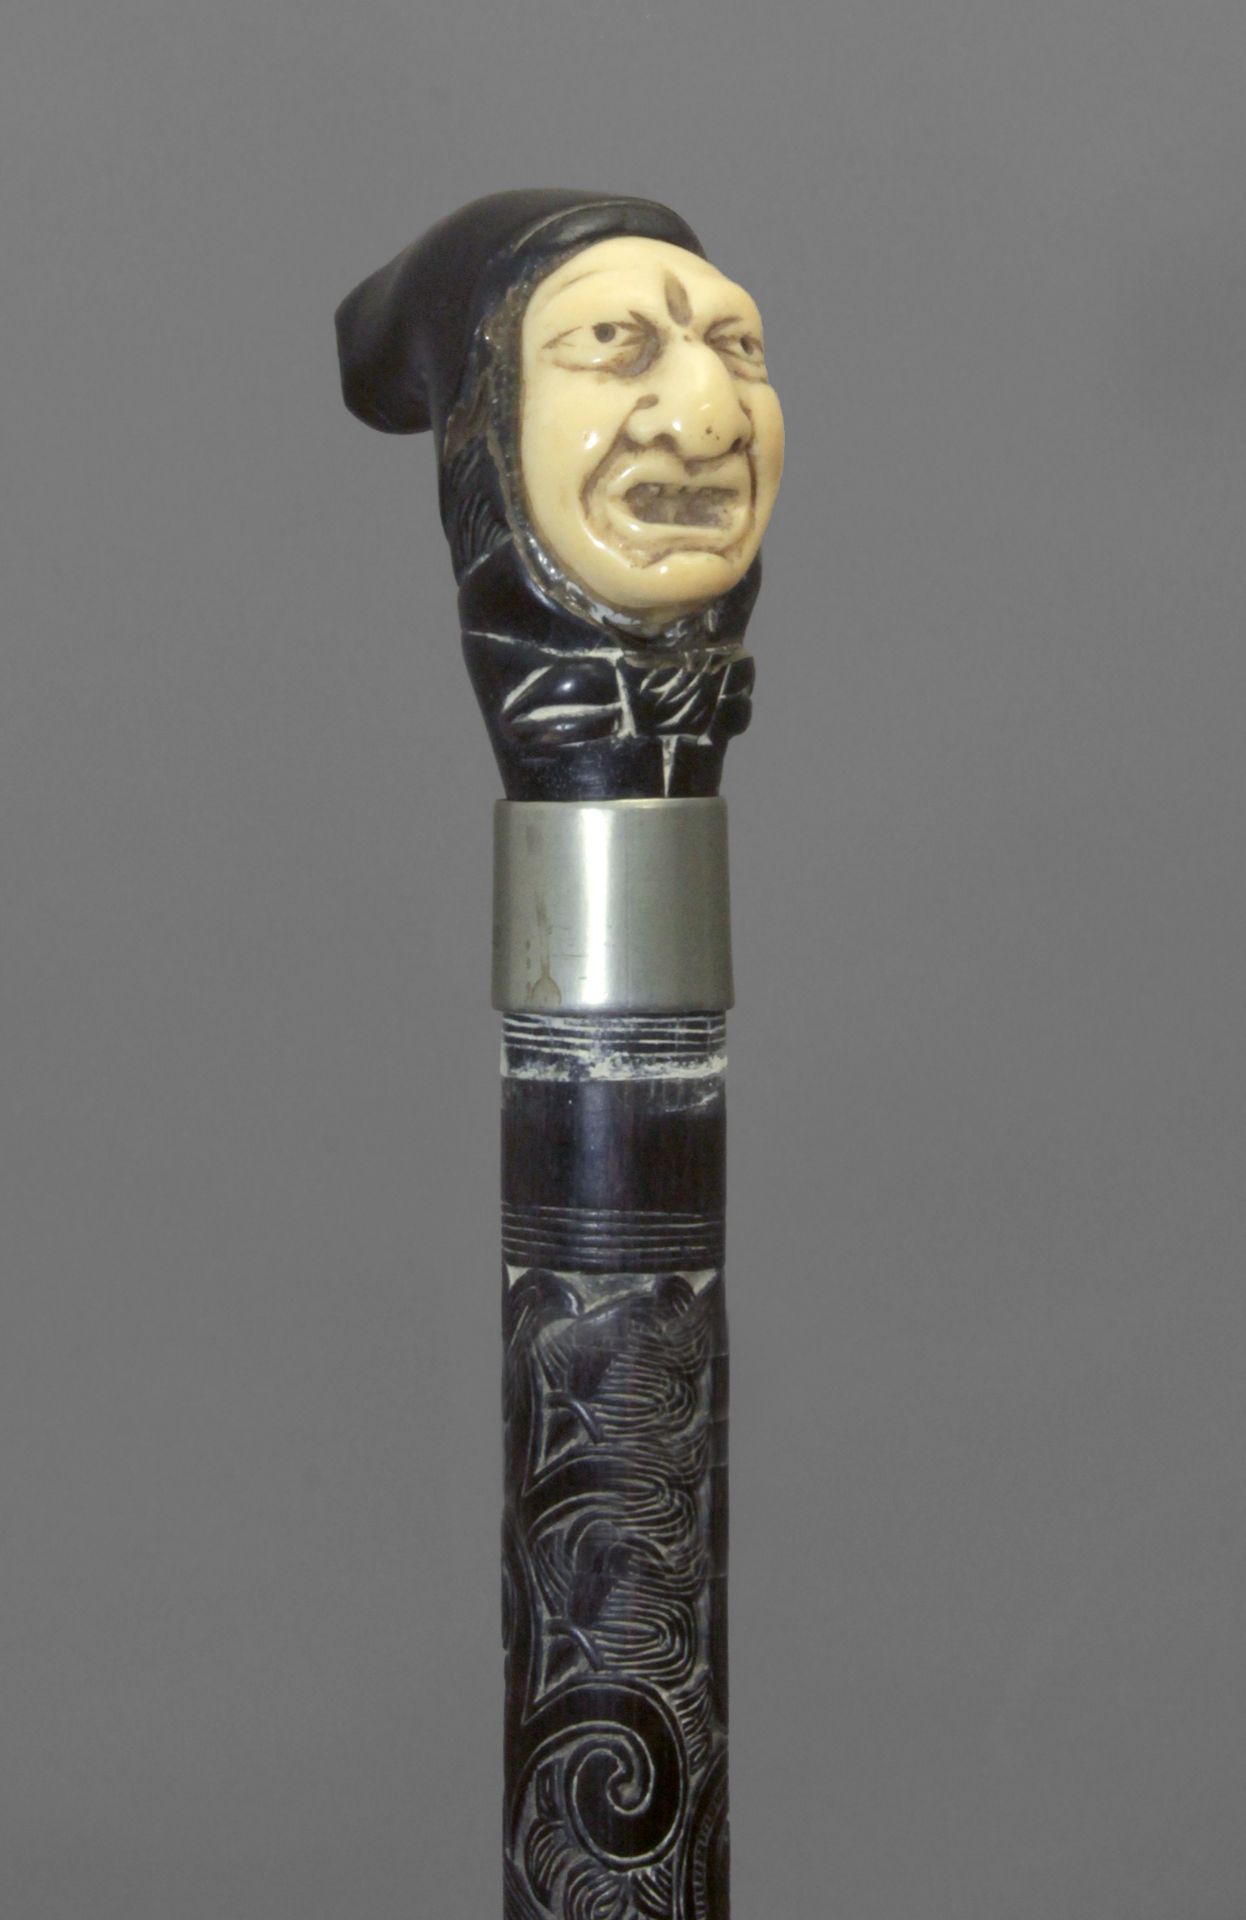 A late 19th century walking stick from the Philippines.